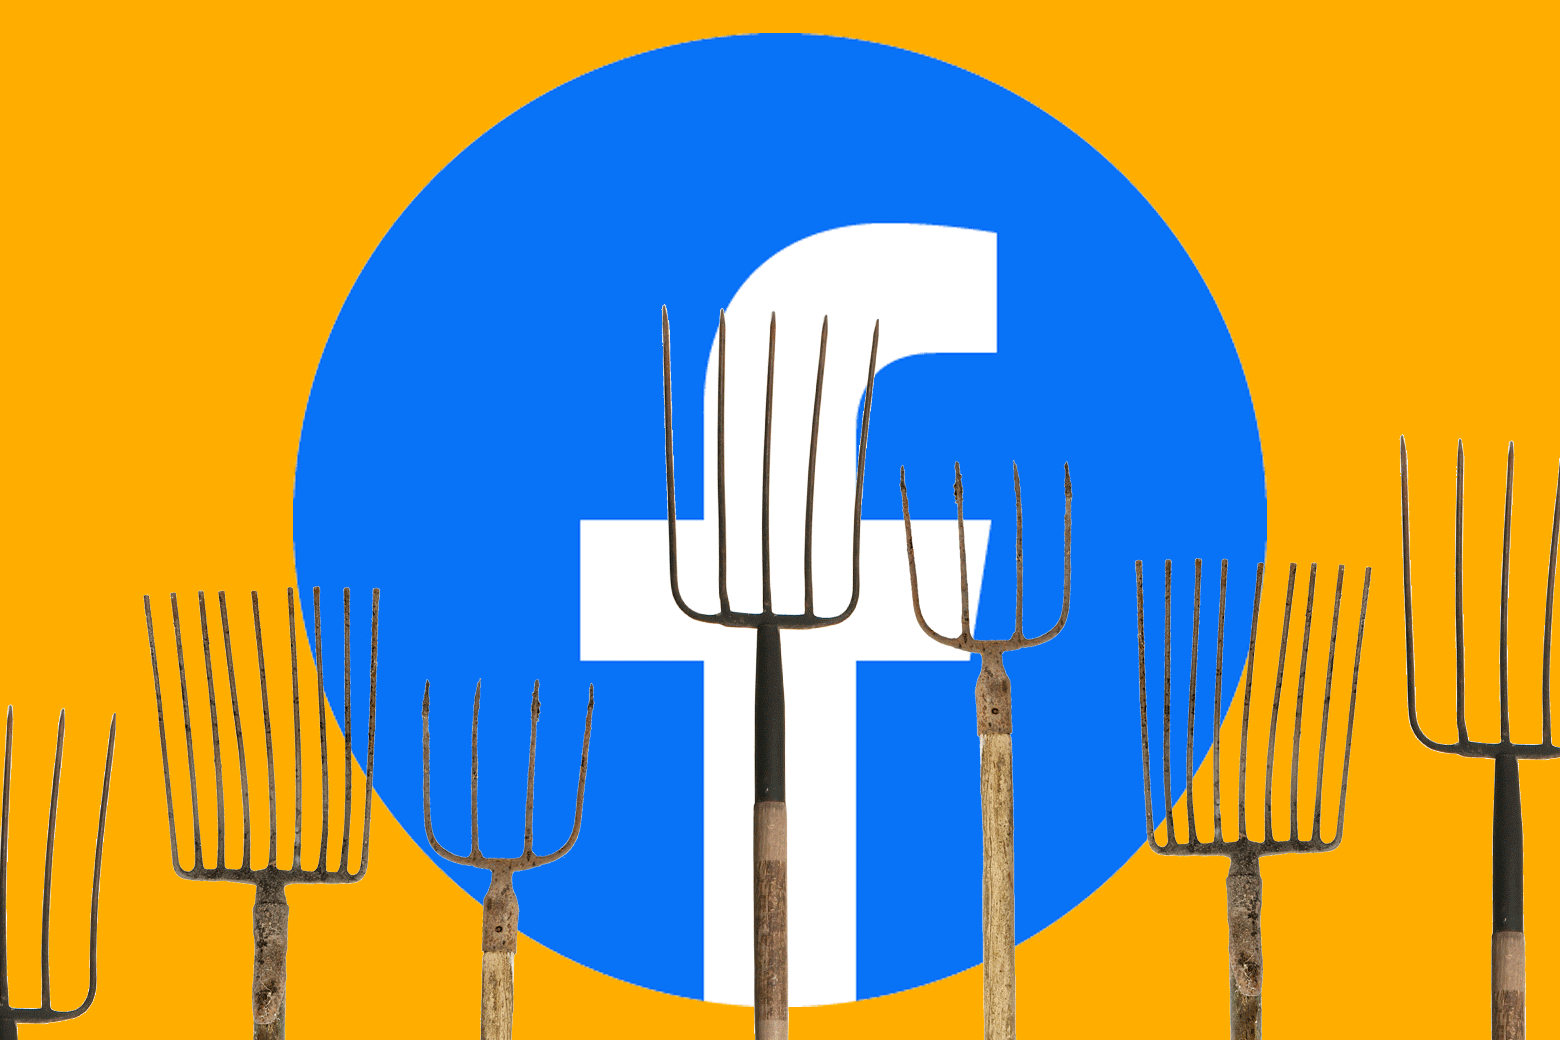 The Facebook logo with pitchforks rising and lowering in front of it.